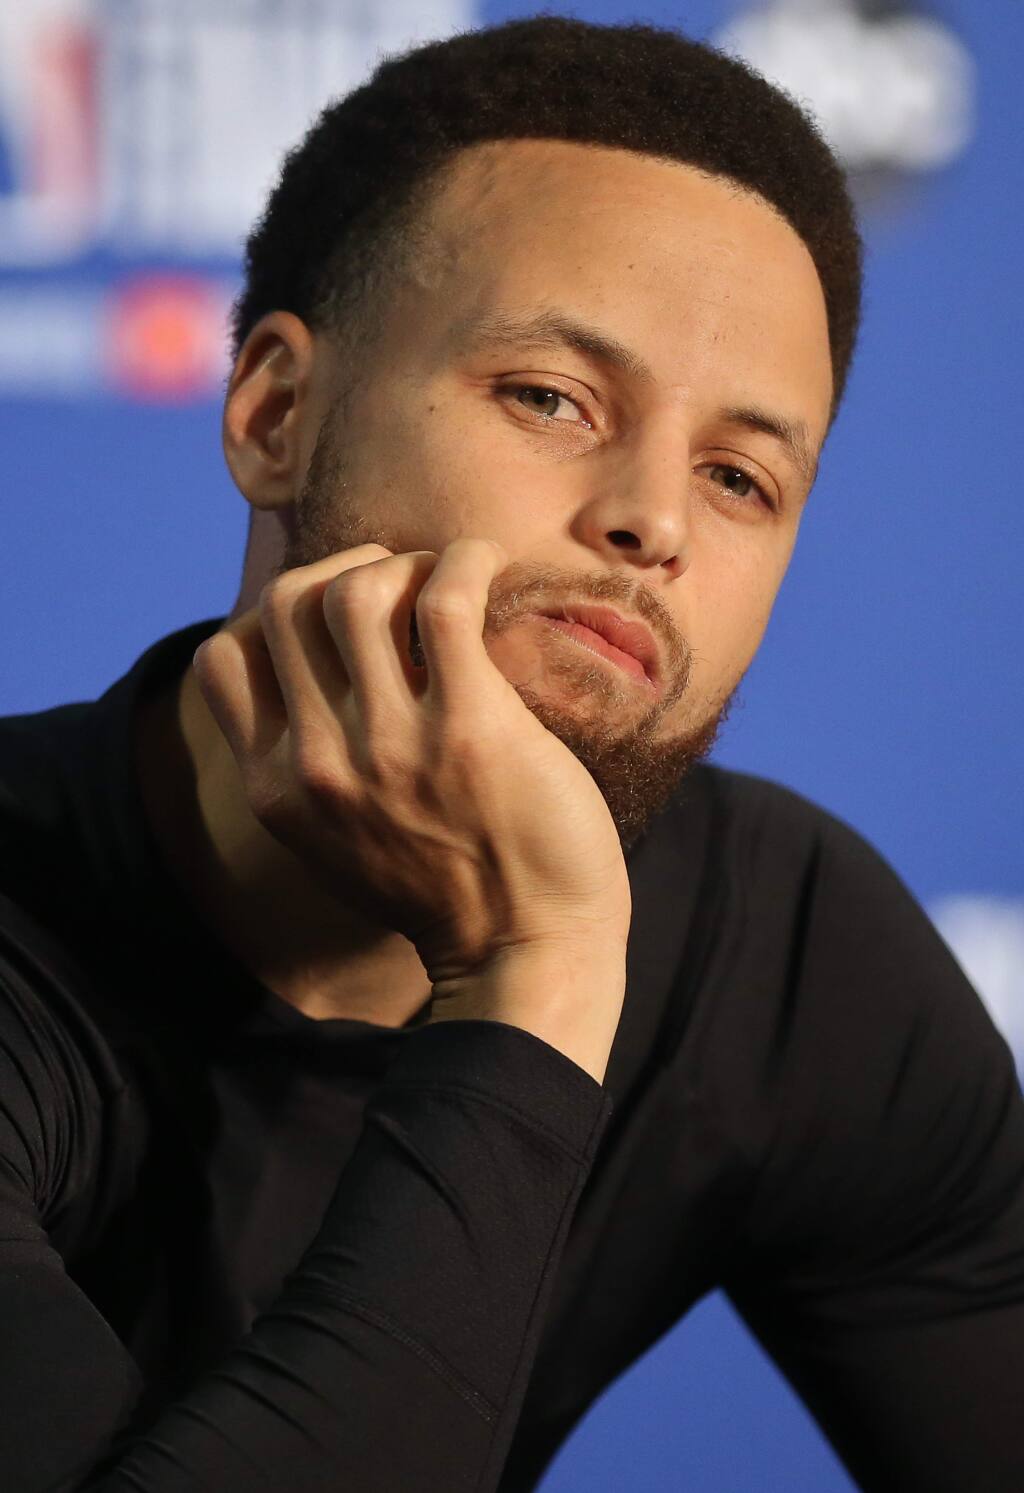 NBA Finals 2019: What did Steph Curry mean by 'janky' defense?